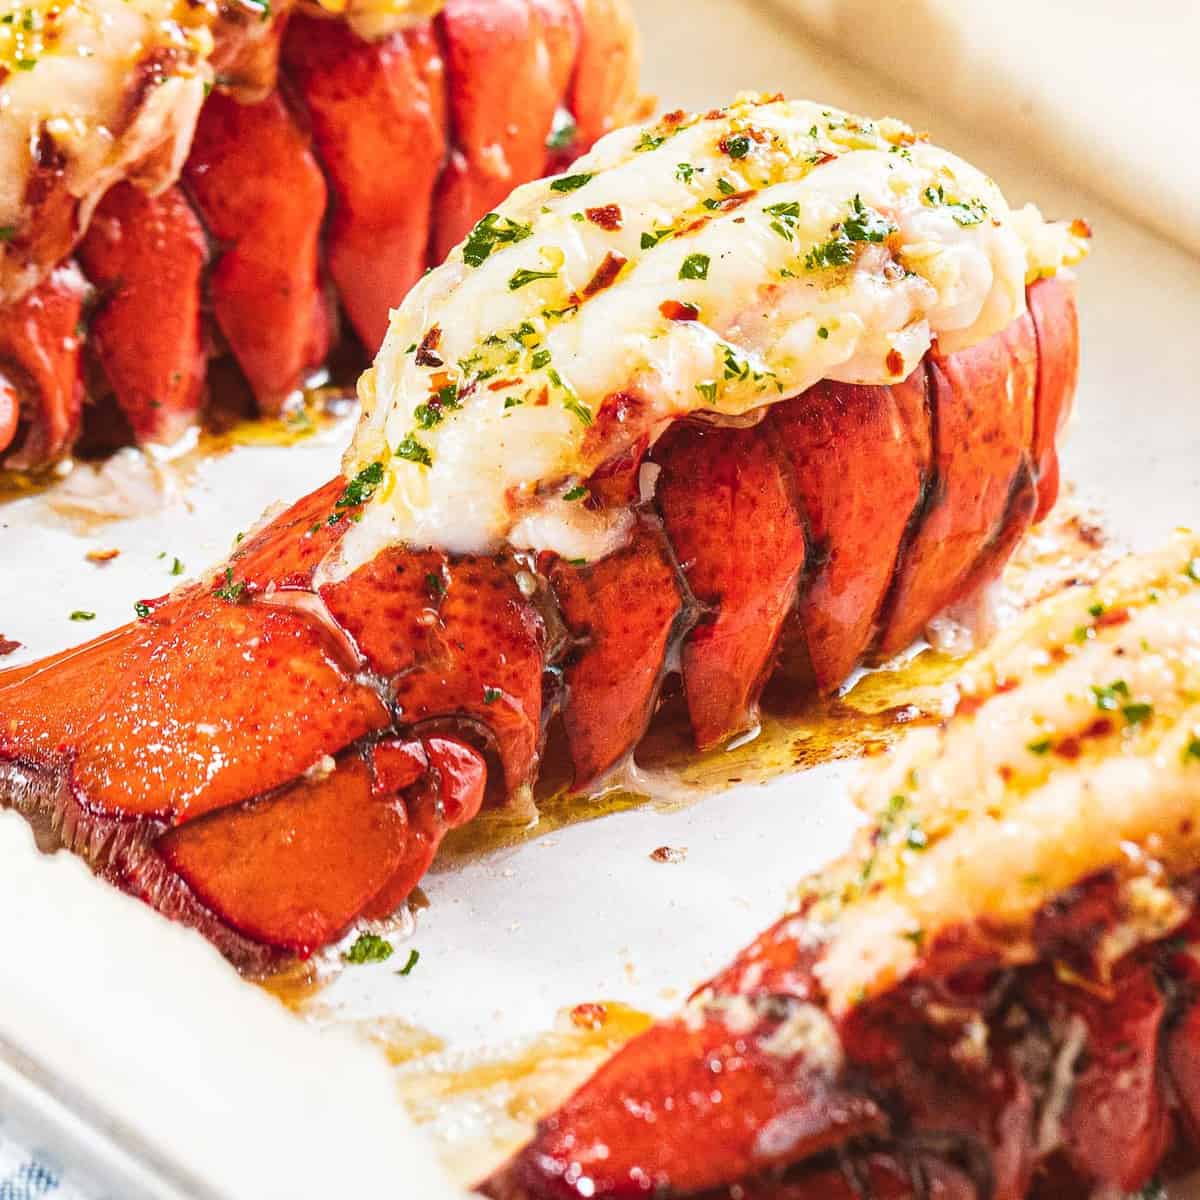 klap Viskeus een vuurtje stoken Broiled Lobster Tail with Garlic Butter - Drive Me Hungry